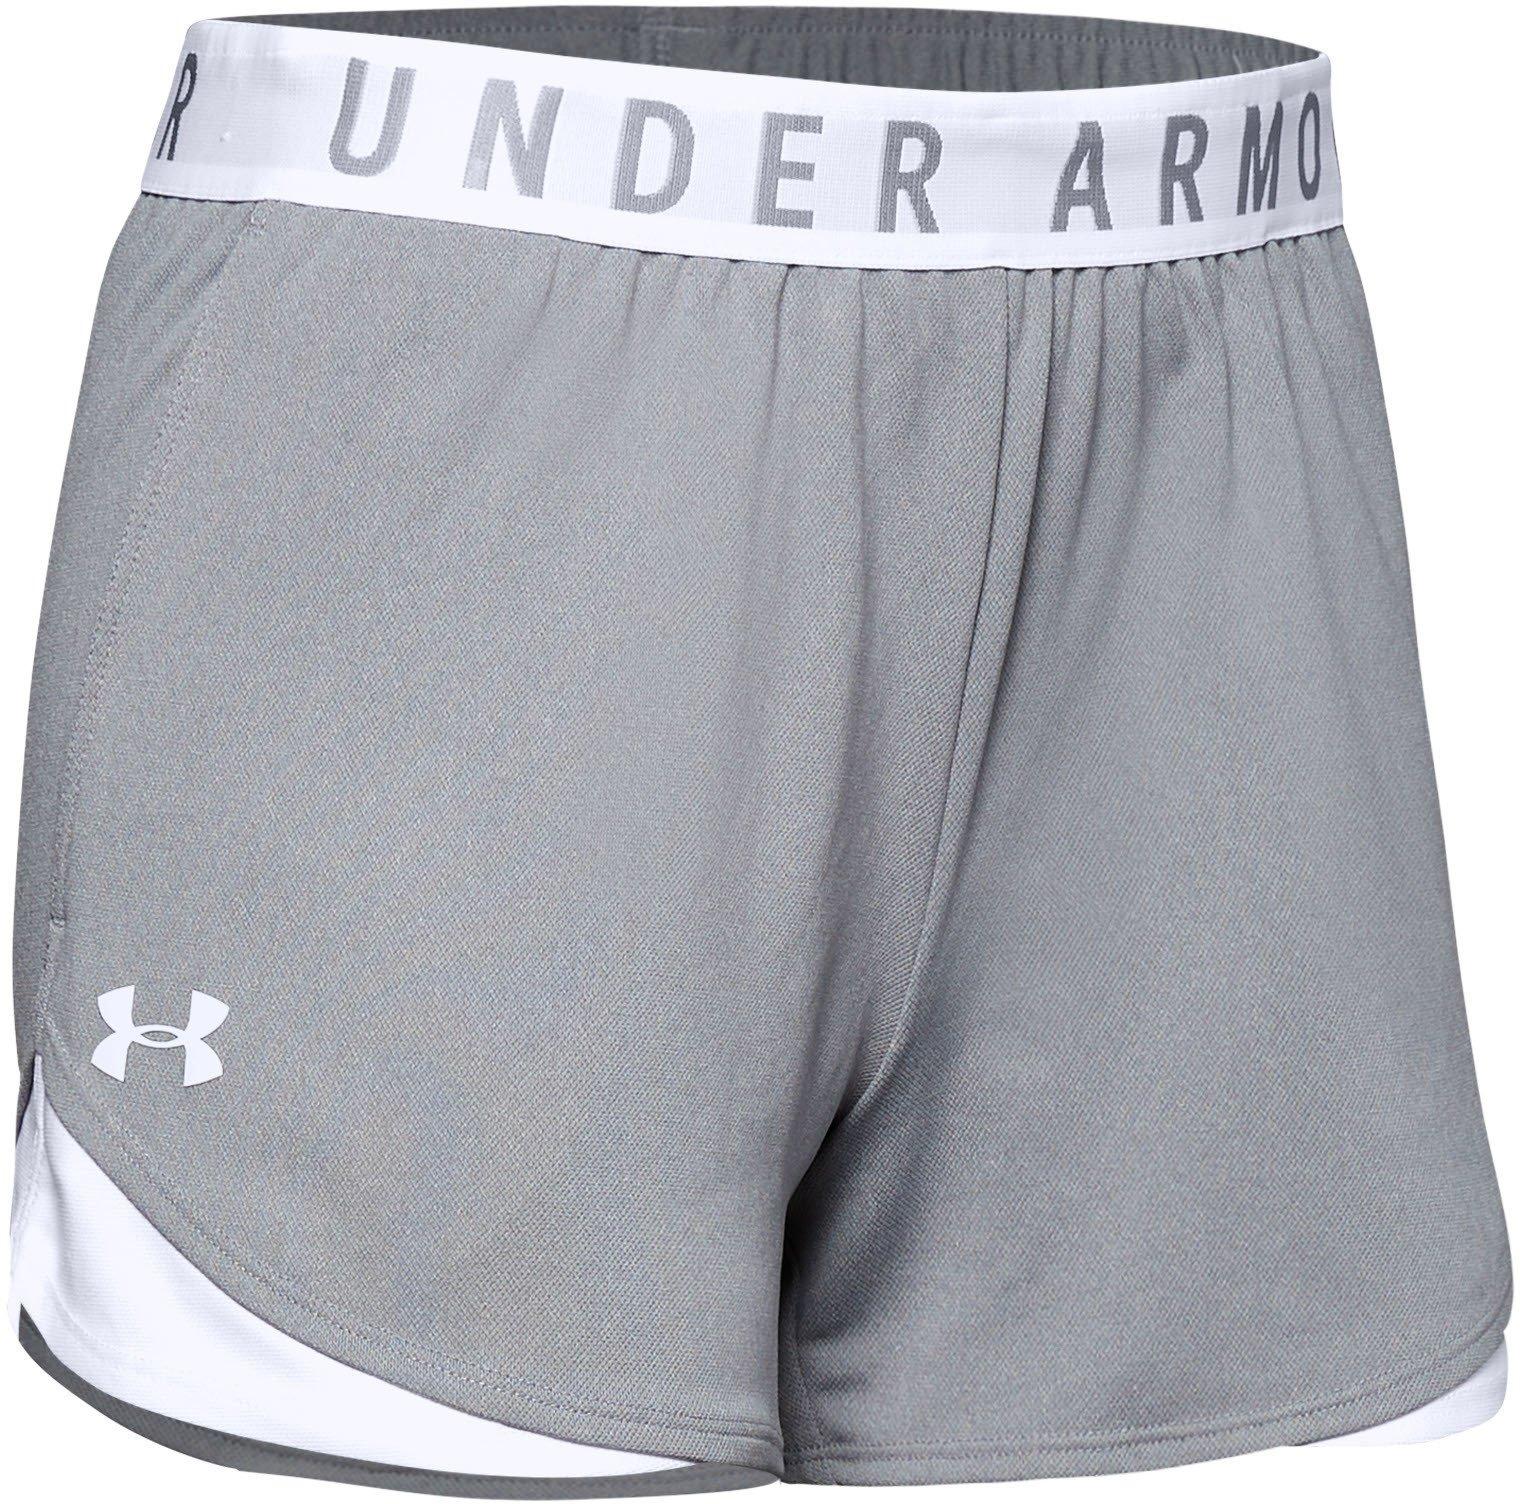 Under Armour Play Up Shorts 3.0-GRY L